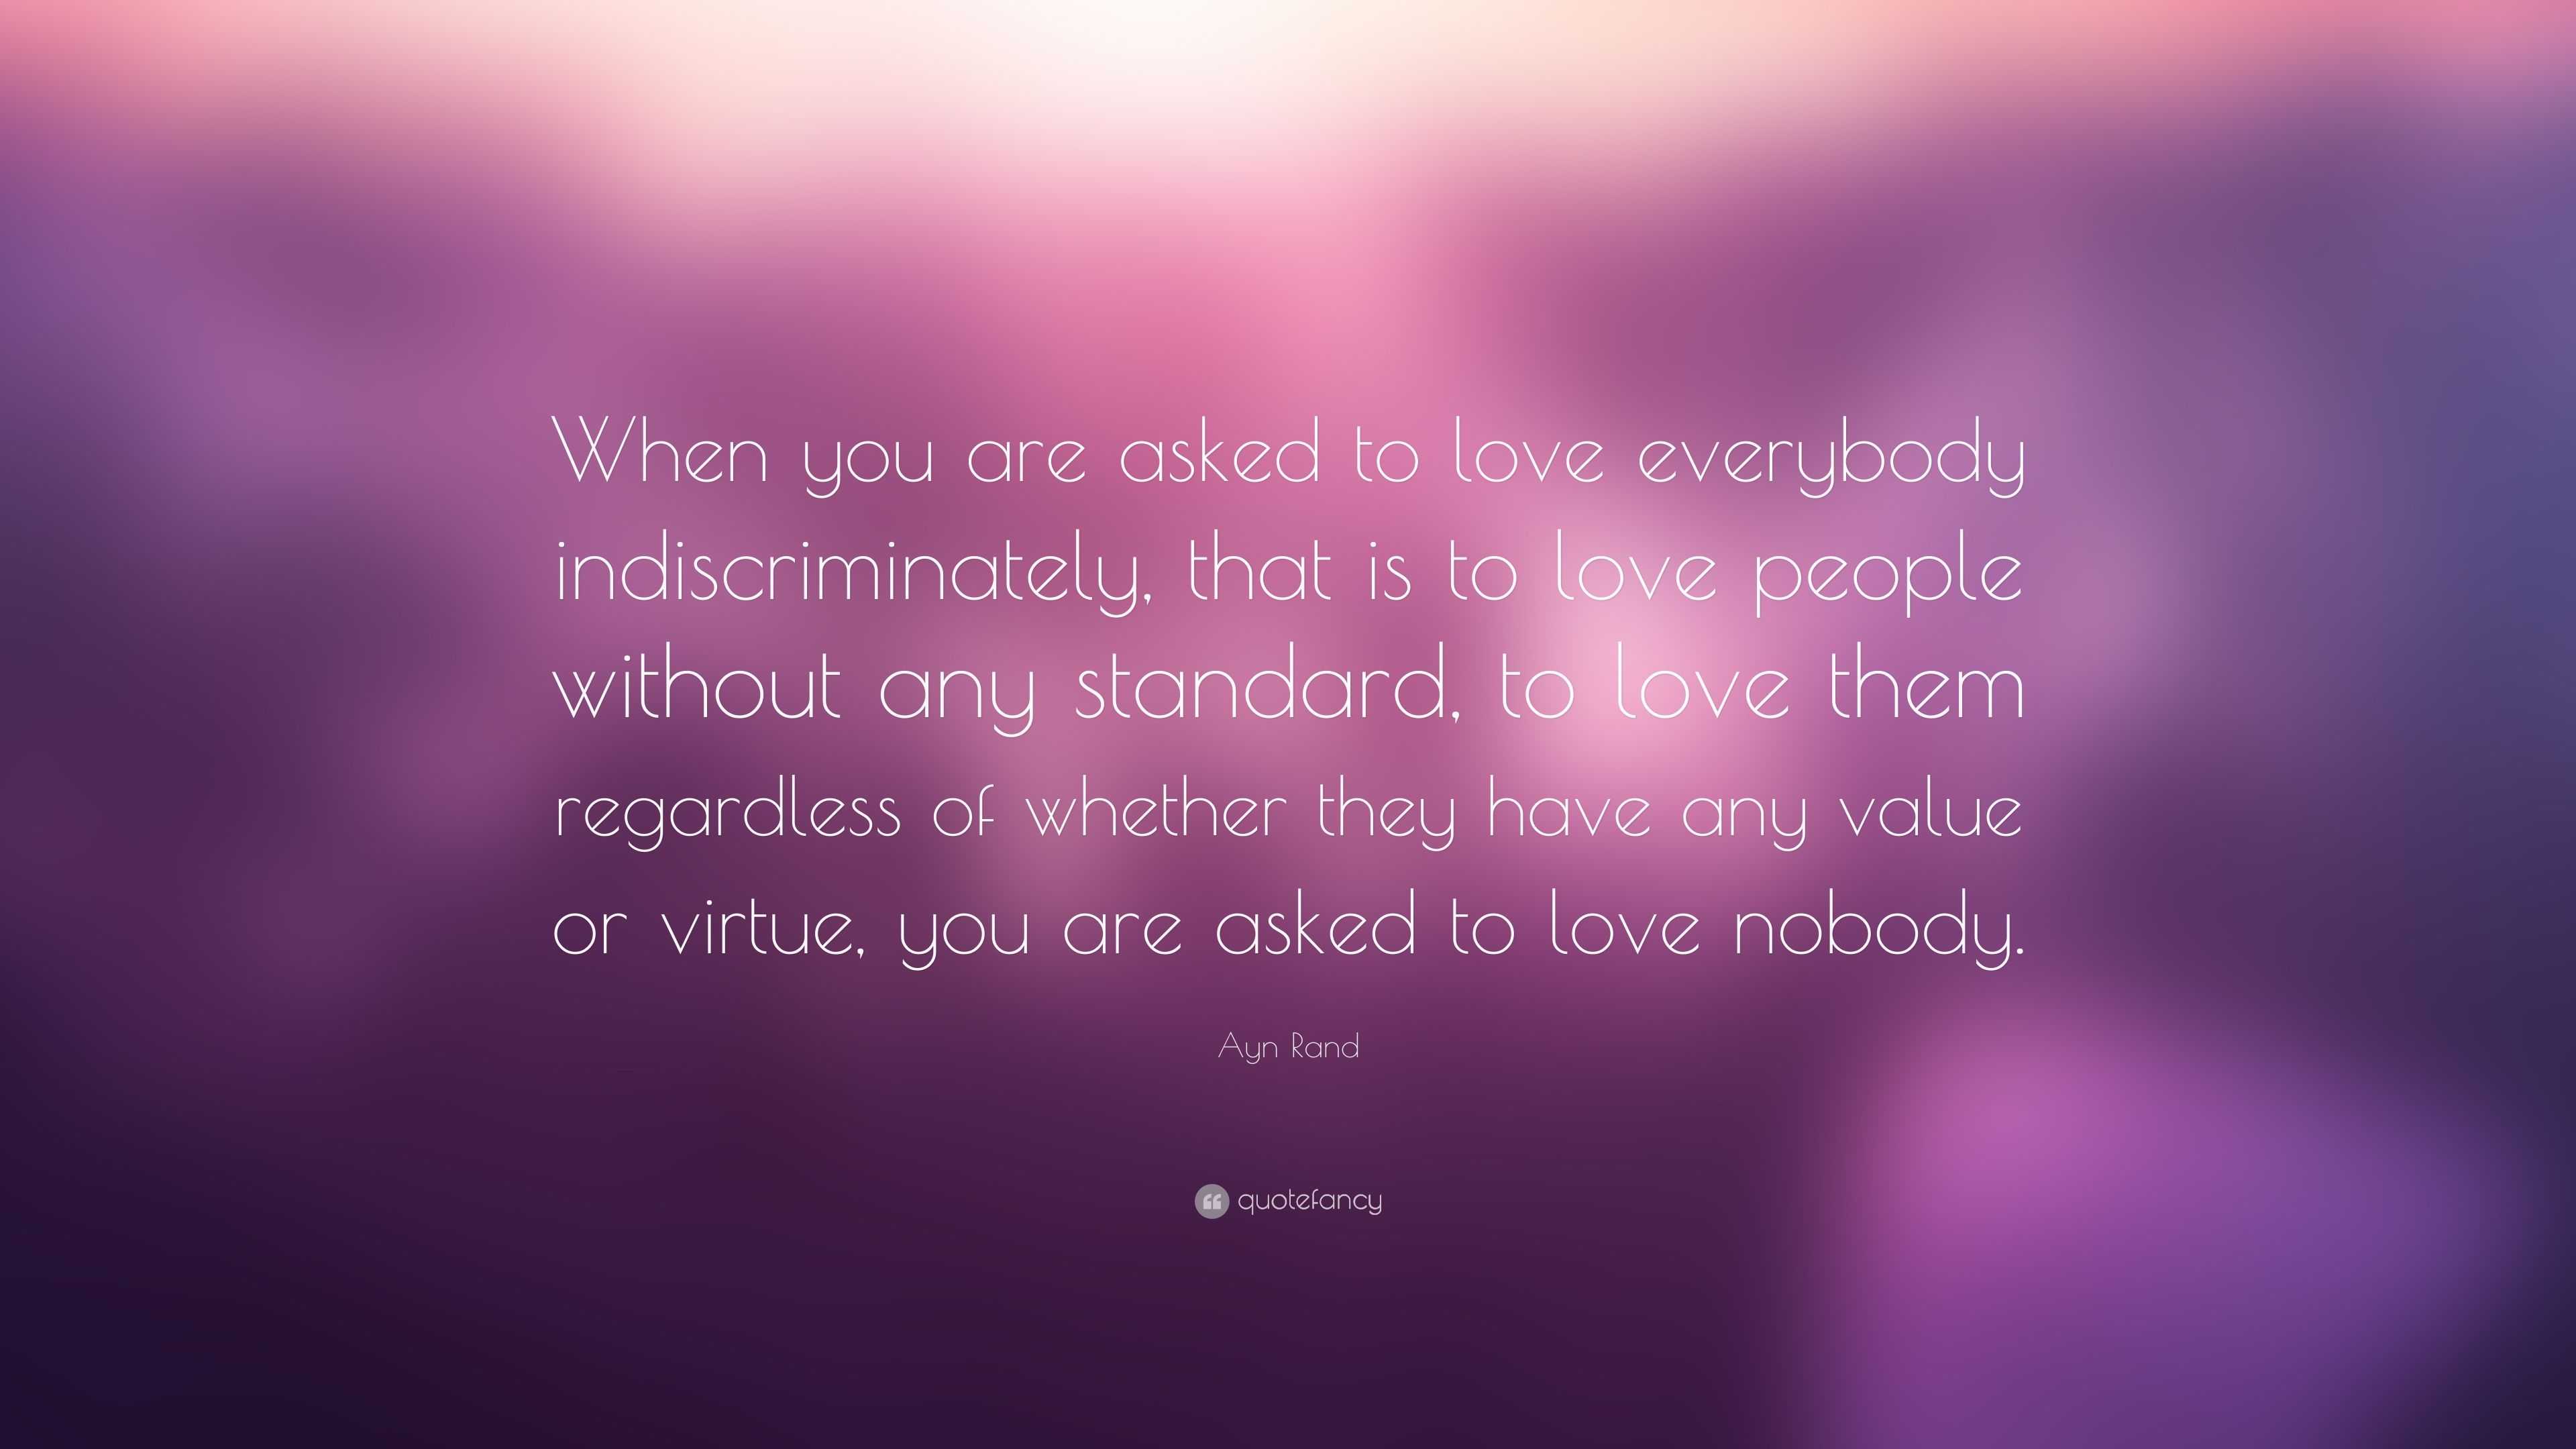 Ayn Rand Quote: “When you are asked to love everybody indiscriminately ...